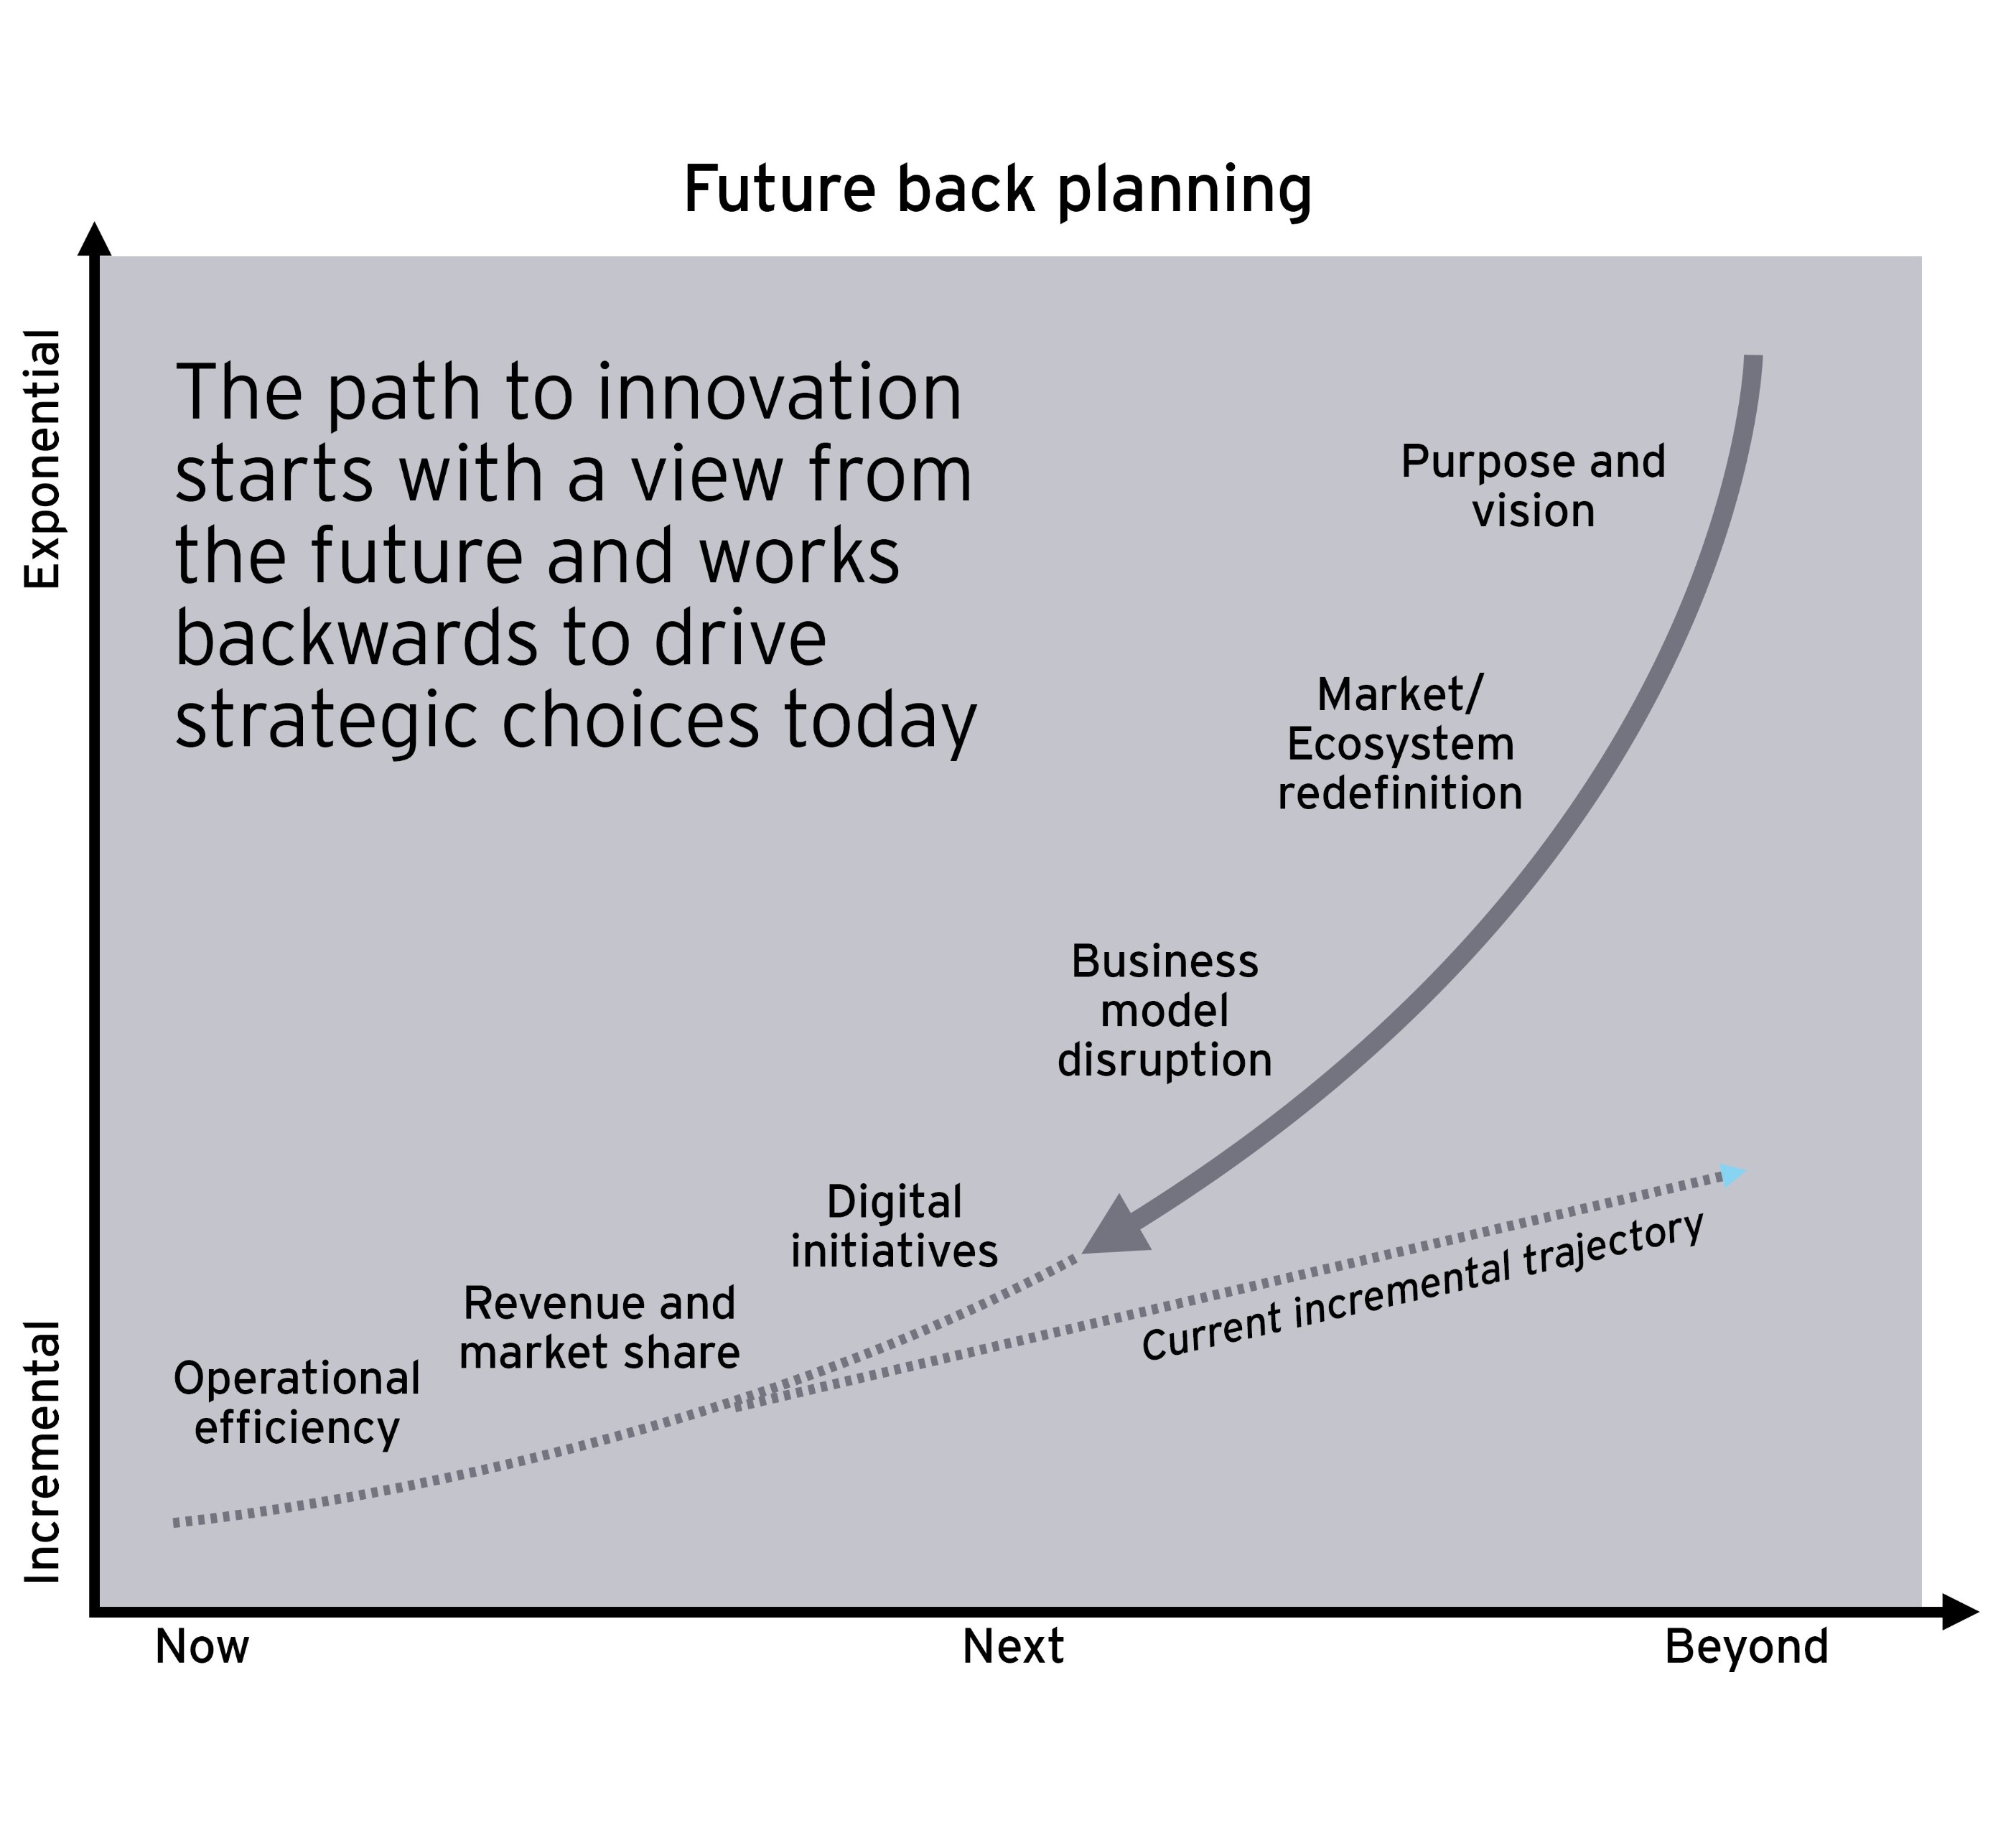 Future back planning graph